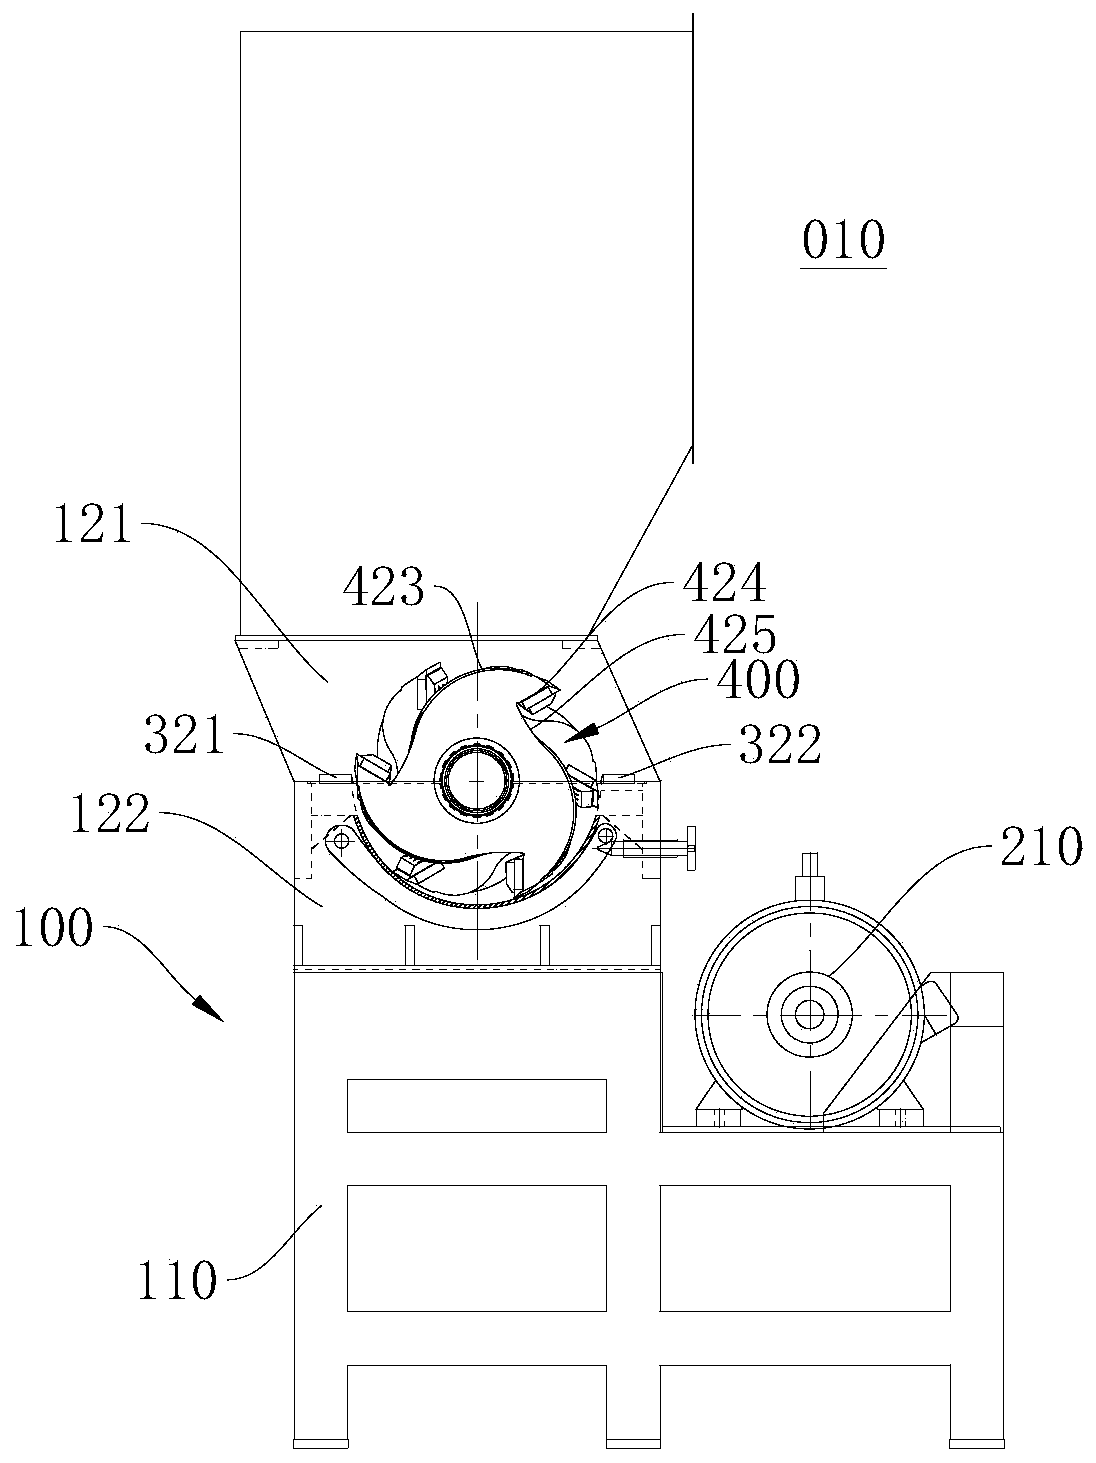 Moving cutter assembly and crushing device